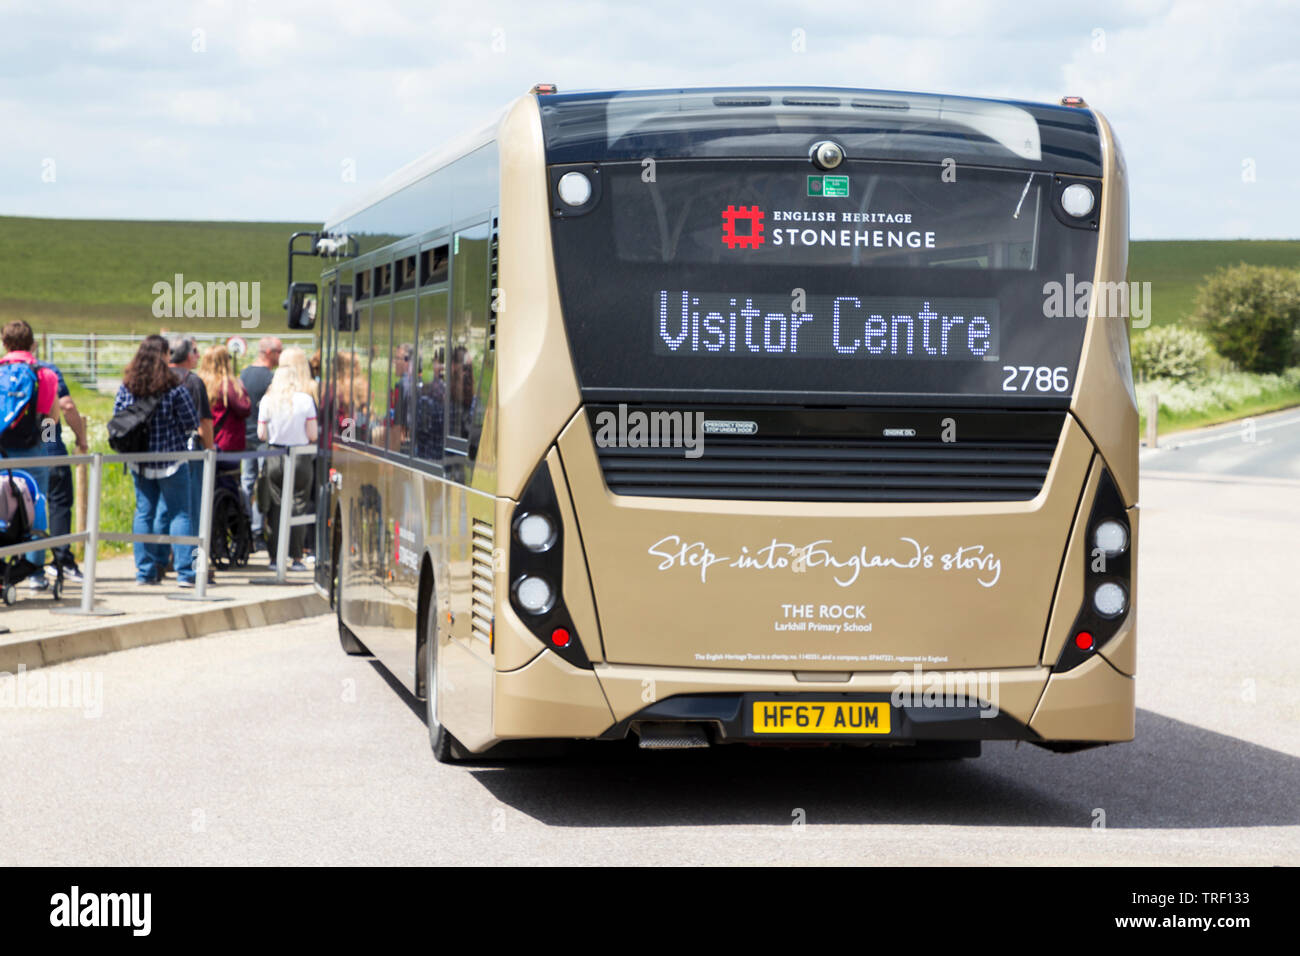 Stonehenge shuttle bus / coach to ferry tourists and visitors from the main visitor centre to the Stonehenge stone monument / circle site. (109) Stock Photo